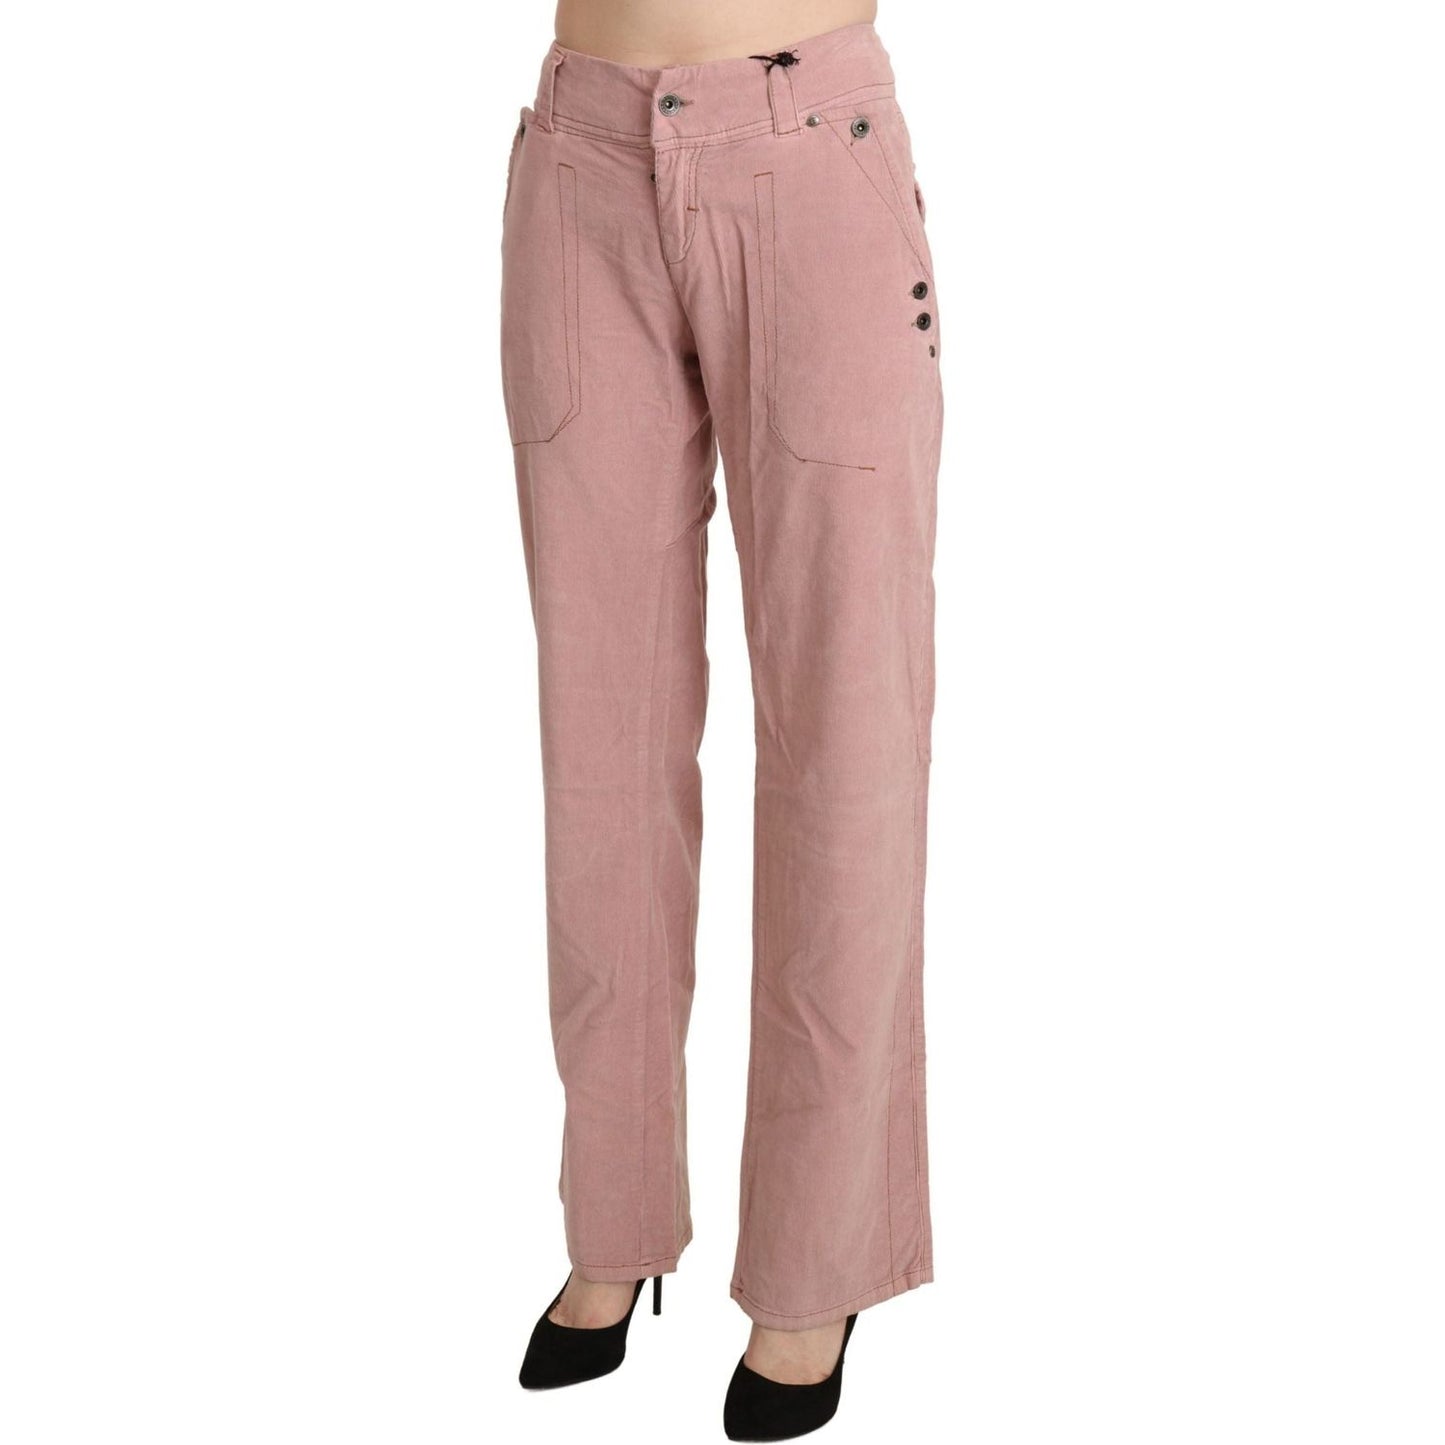 Ermanno Scervino Pink High Waist Straight Cotton Trouser Pants pink-high-waist-straight-cotton-trouser-pants